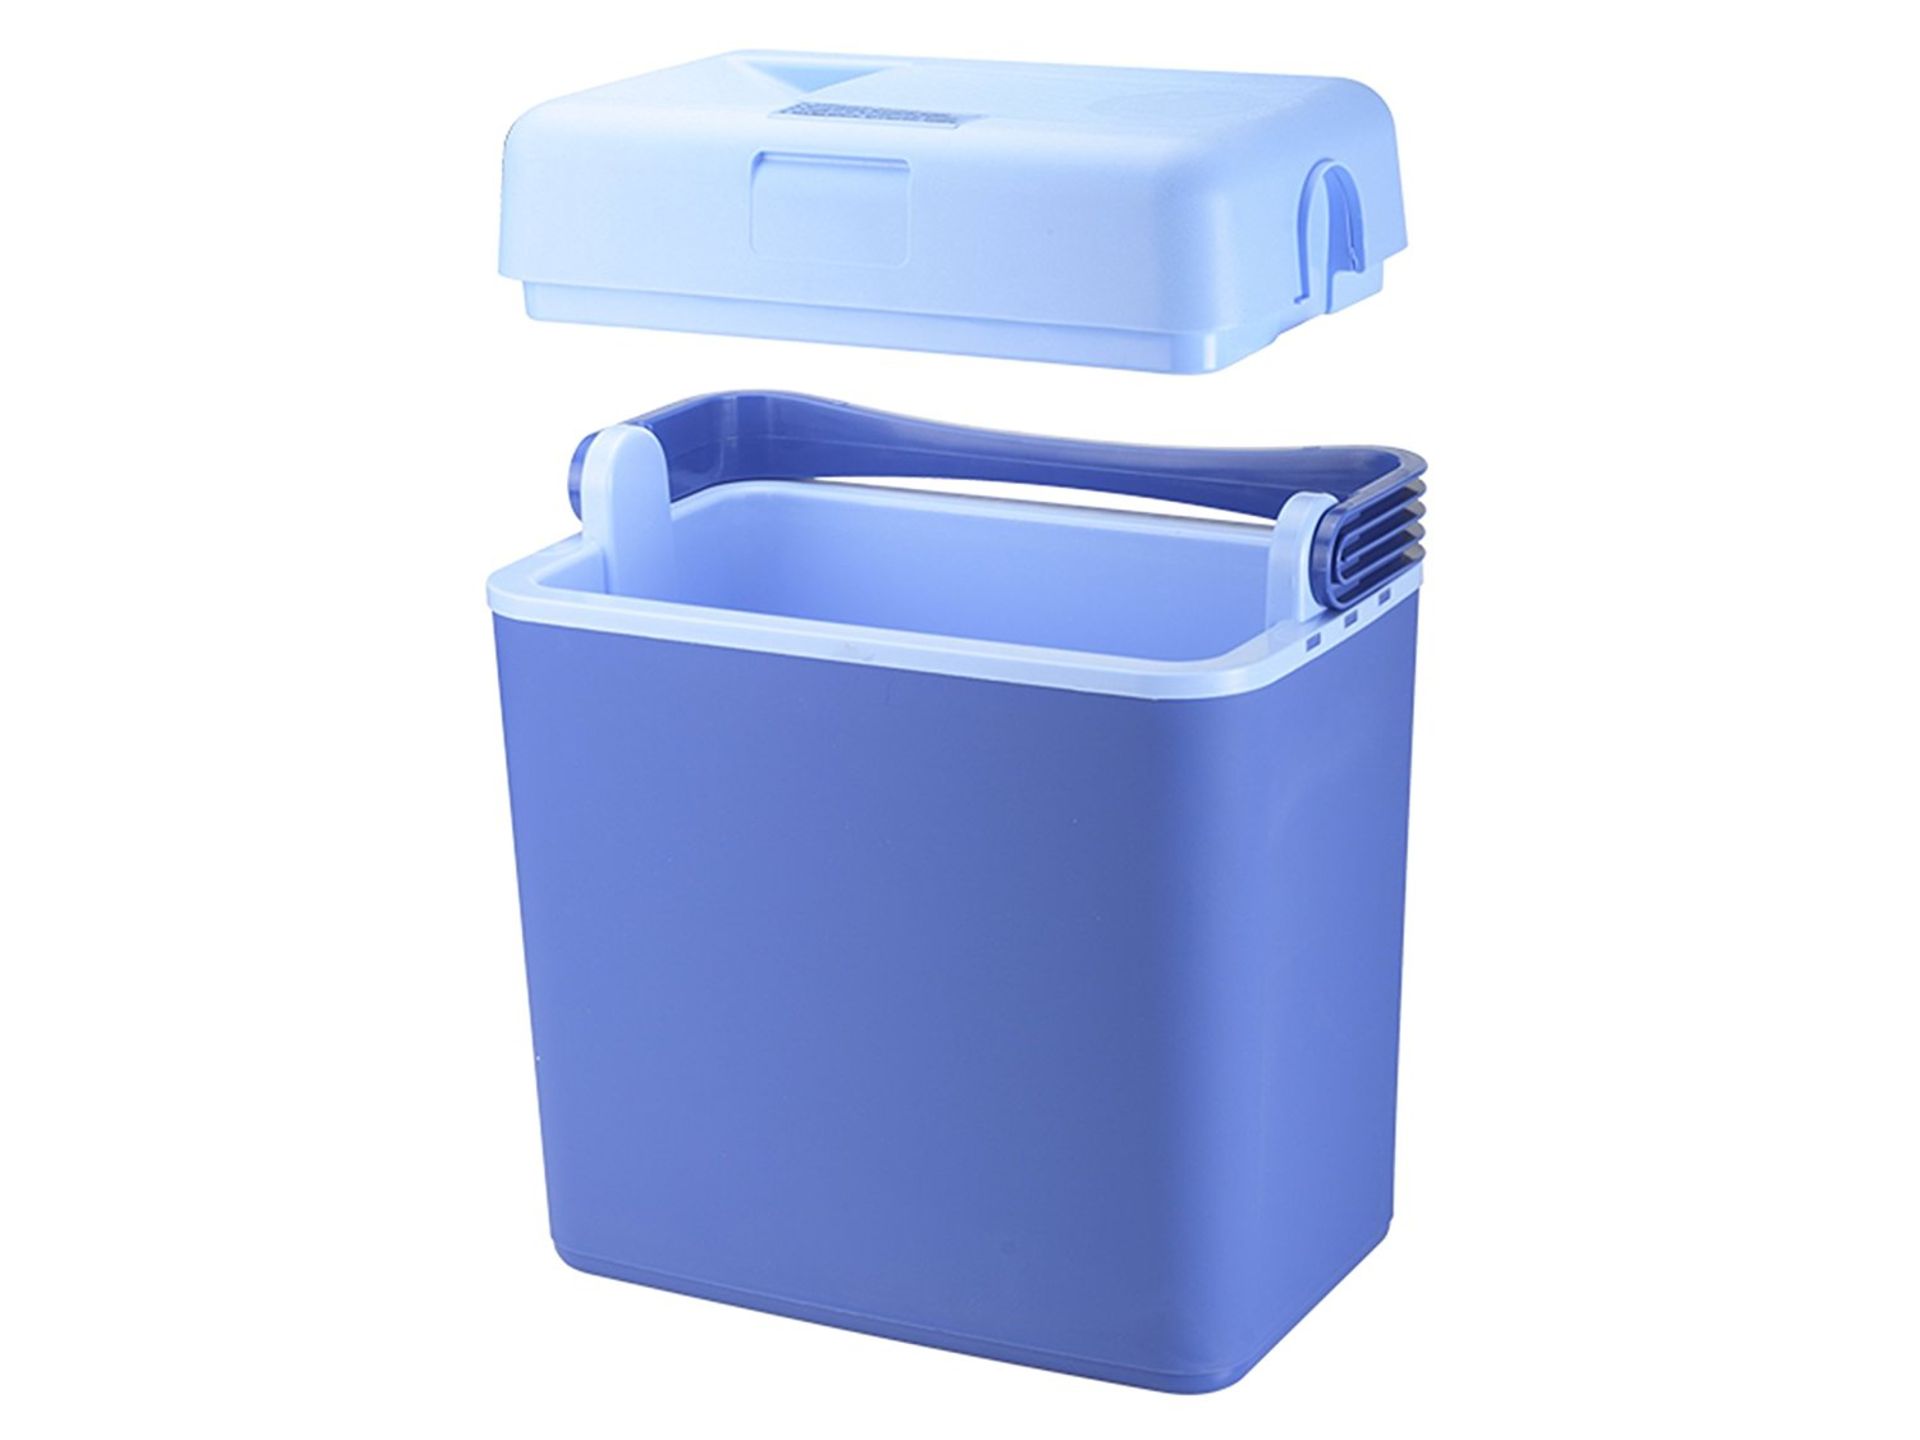 10 x Tristar Thermoelectric 24 Litre Lightweight Cool Boxes - Ideal For Camping, Picnics or - Image 7 of 8